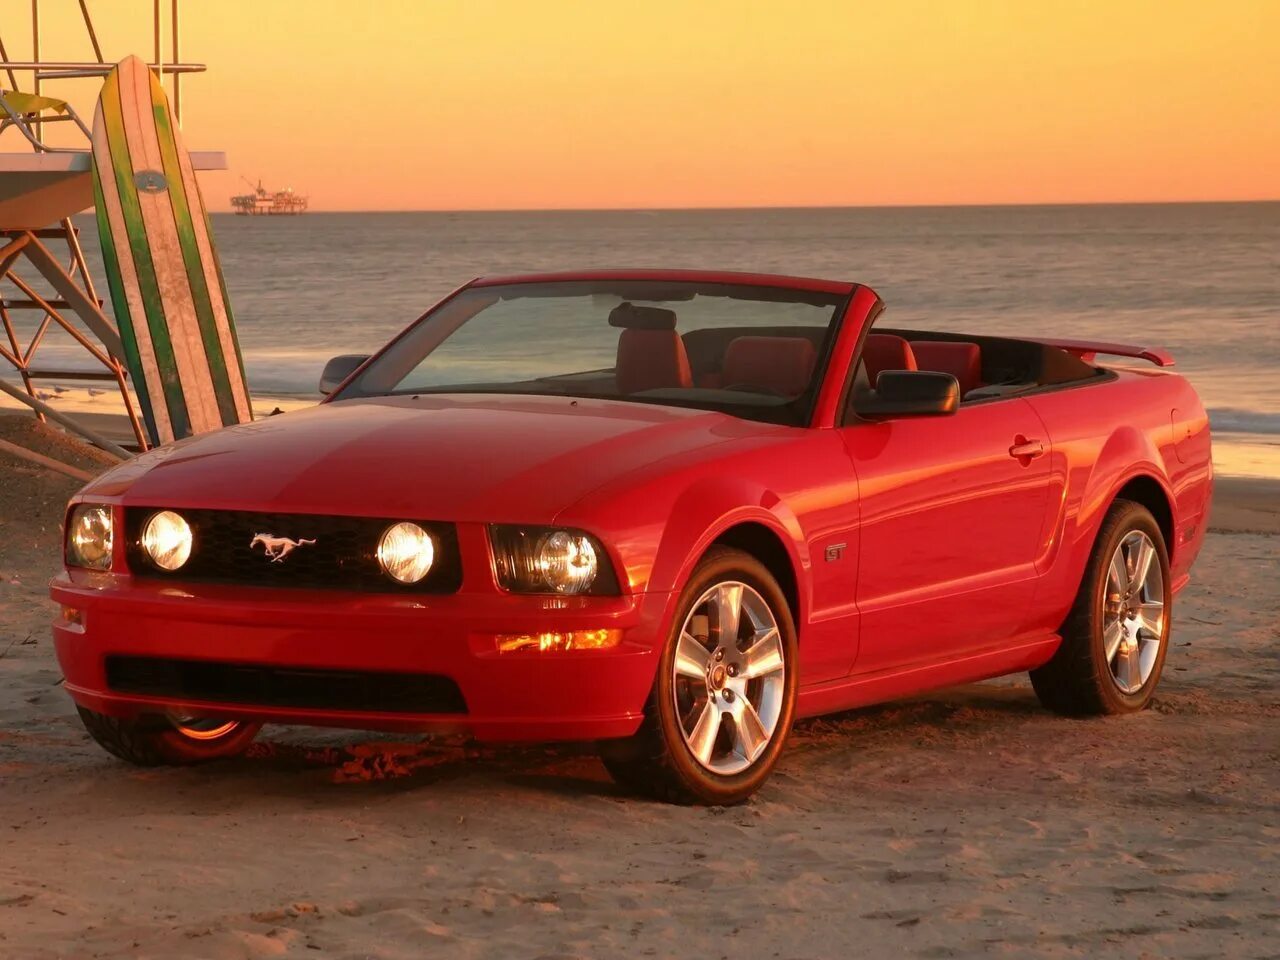 Ford Mustang 2005 Cabriolet. Форд Мустанг 2005. Форд Мустанг gt 2004. Ford Mustang gt Convertible 2005. Расход форд мустанг